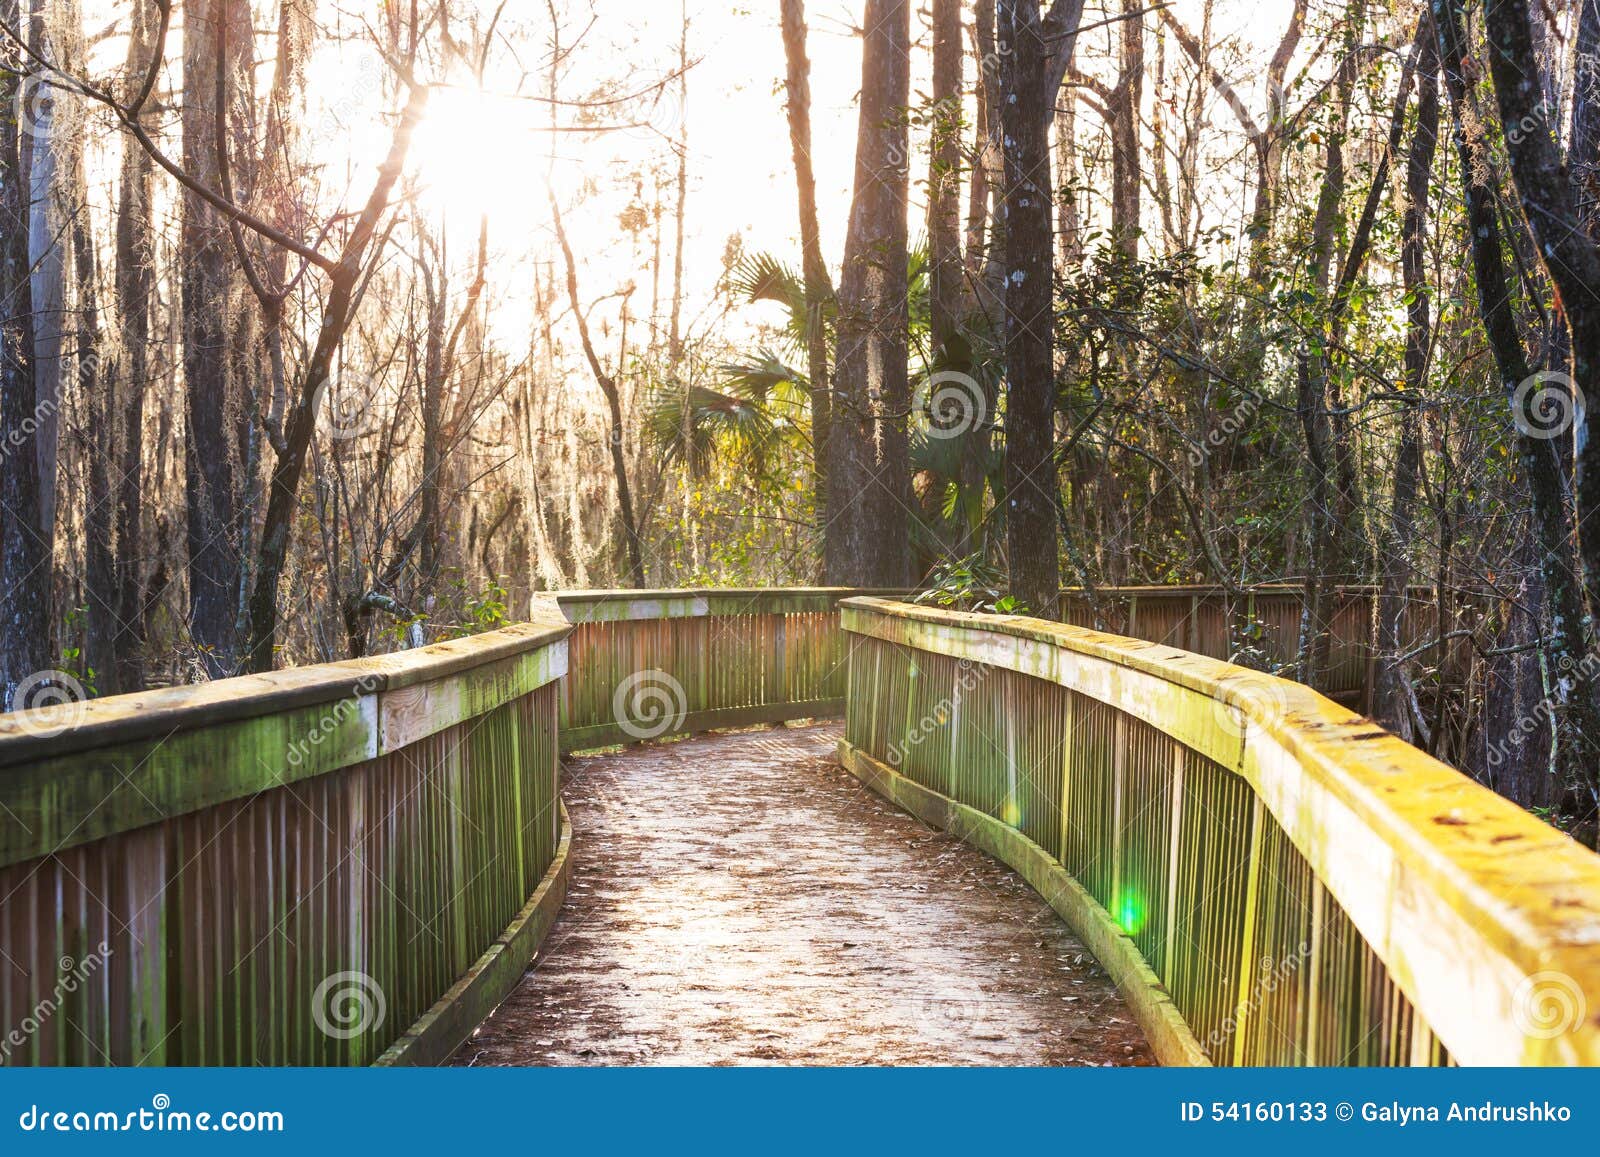 Boardwalk In Swamp Stock Image Image Of Clear Environment 54160133